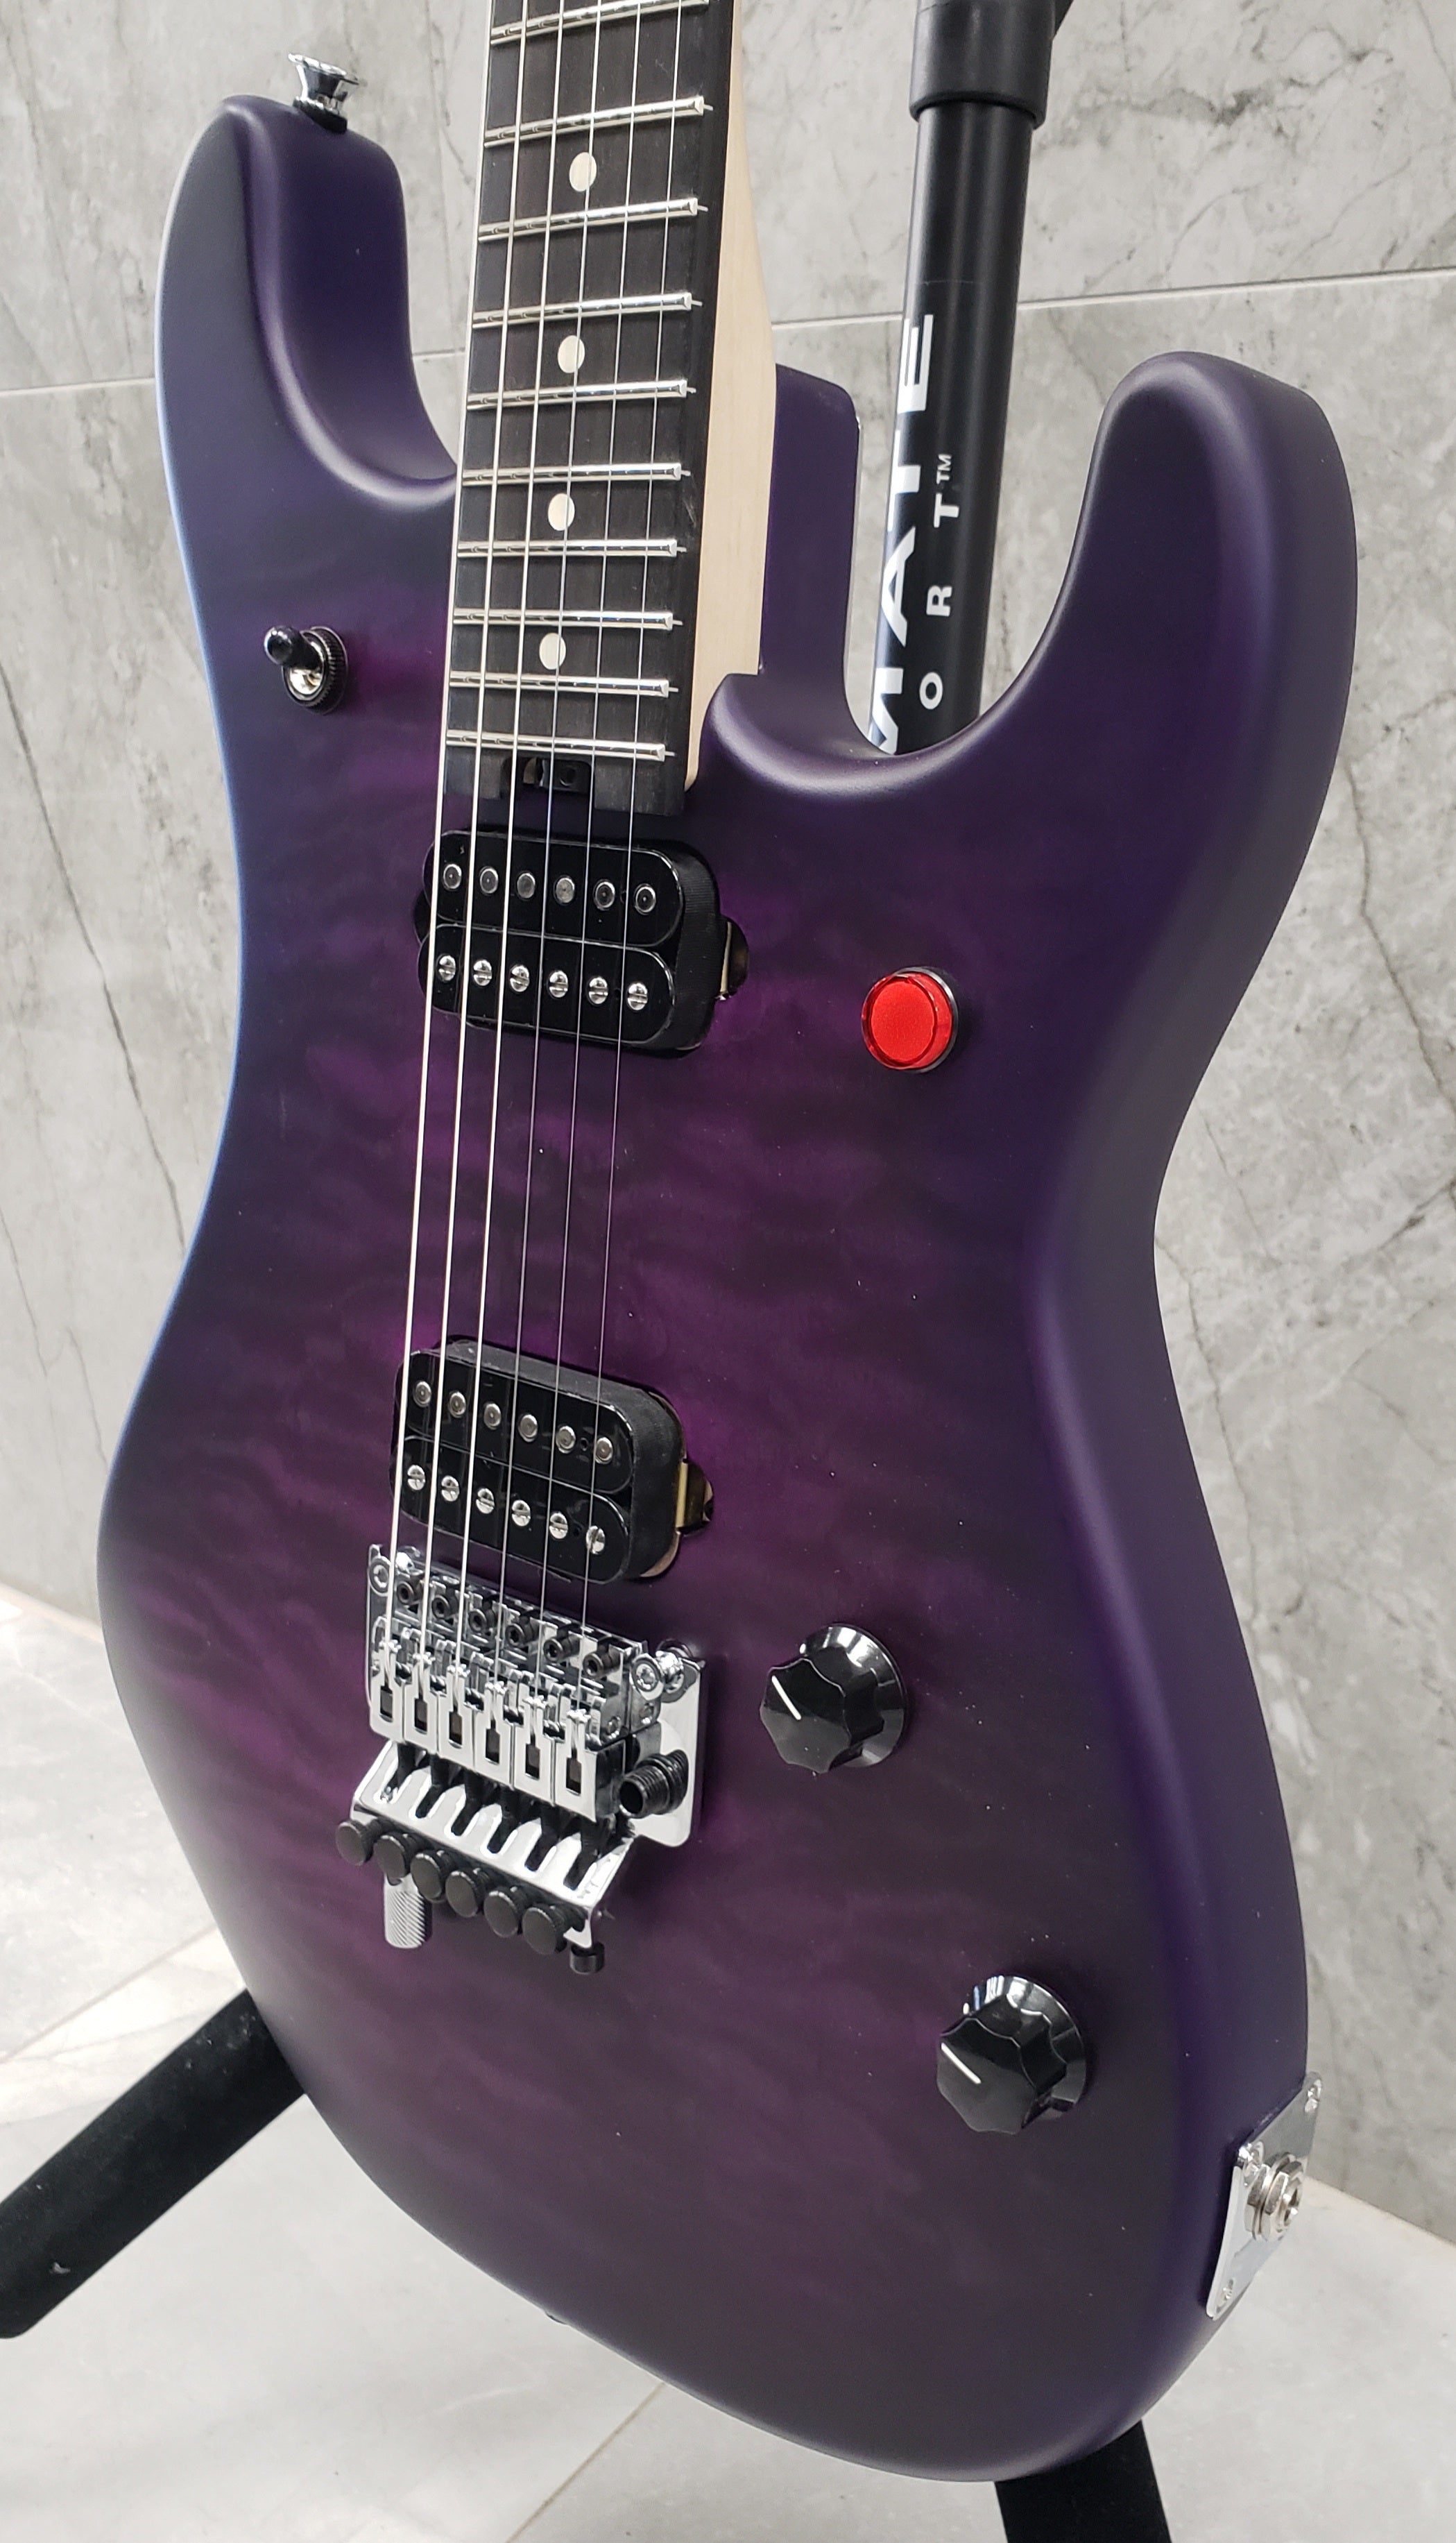 EVH 5150 Series Deluxe QM QUILTED MAPLE Ebony Fingerboard Purple Daze Satin Finish 5108002535 IN STOCK - SERIAL NUMBER EVH2113358 - 7.4 LBS